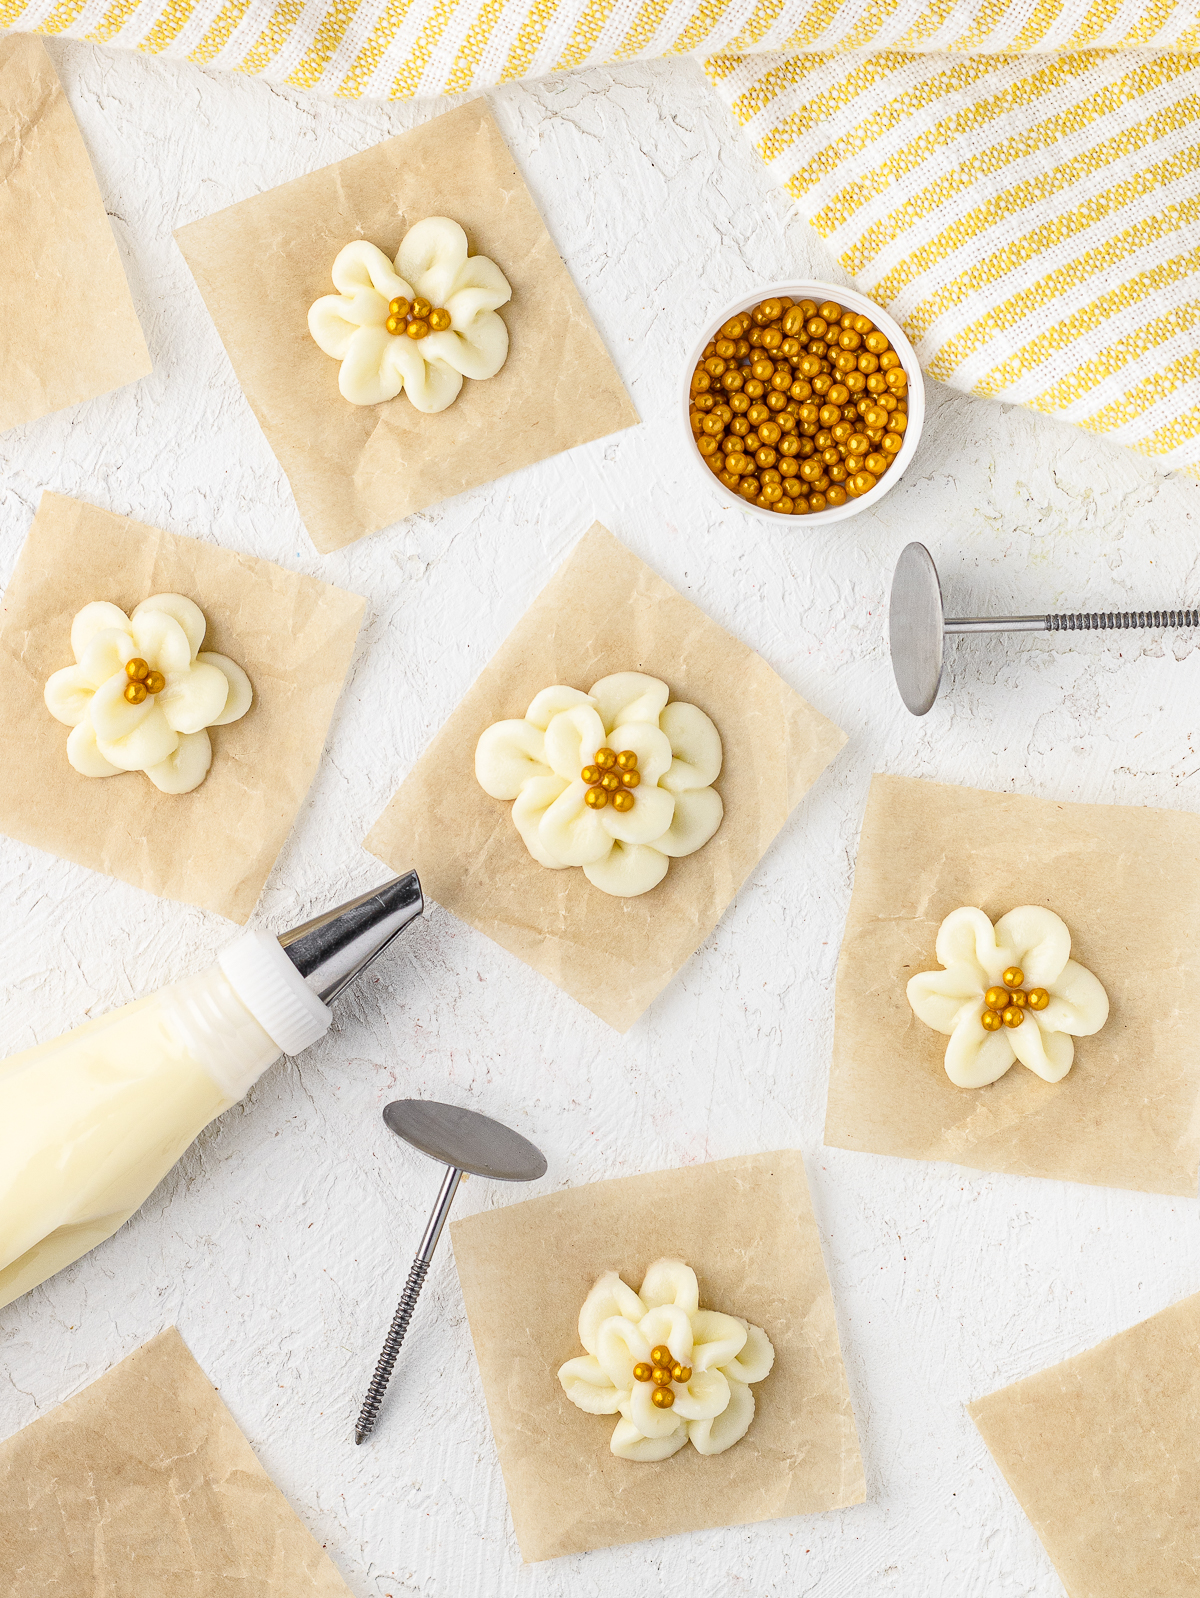 Piped flowers of Not So Sweet Buttercream.